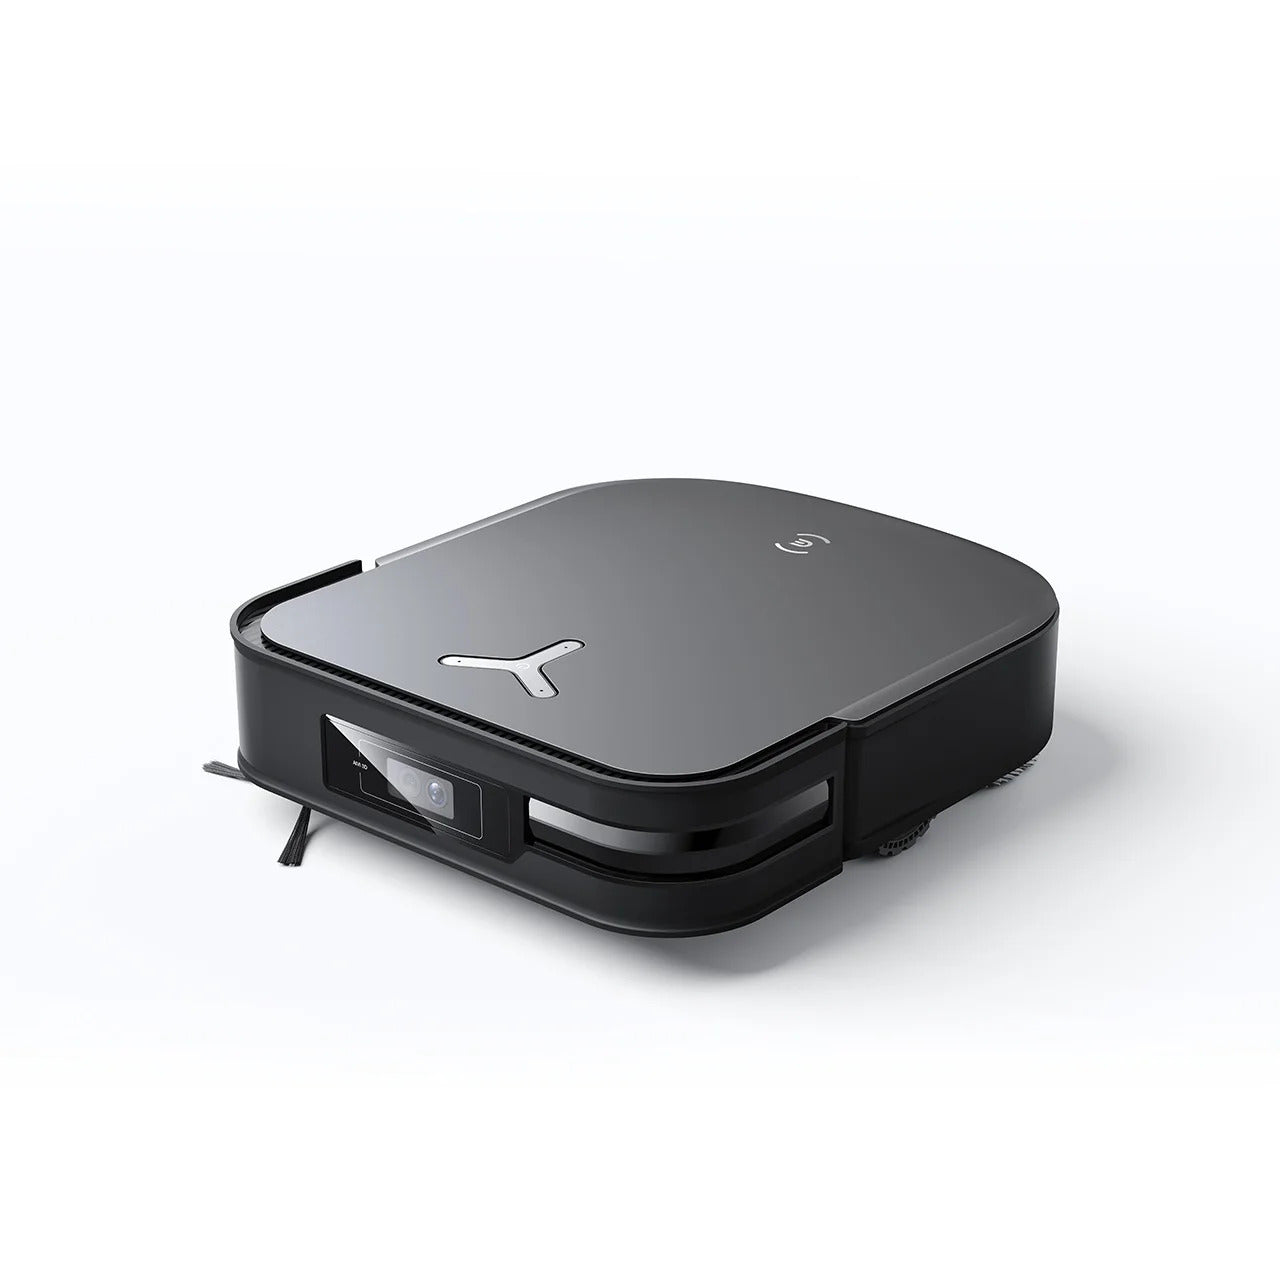 Ecovacs Deebot X2 Omni Robot Vacuum Cleaner with Self-Emptying & Hot Air Drying - Black Ecovacs